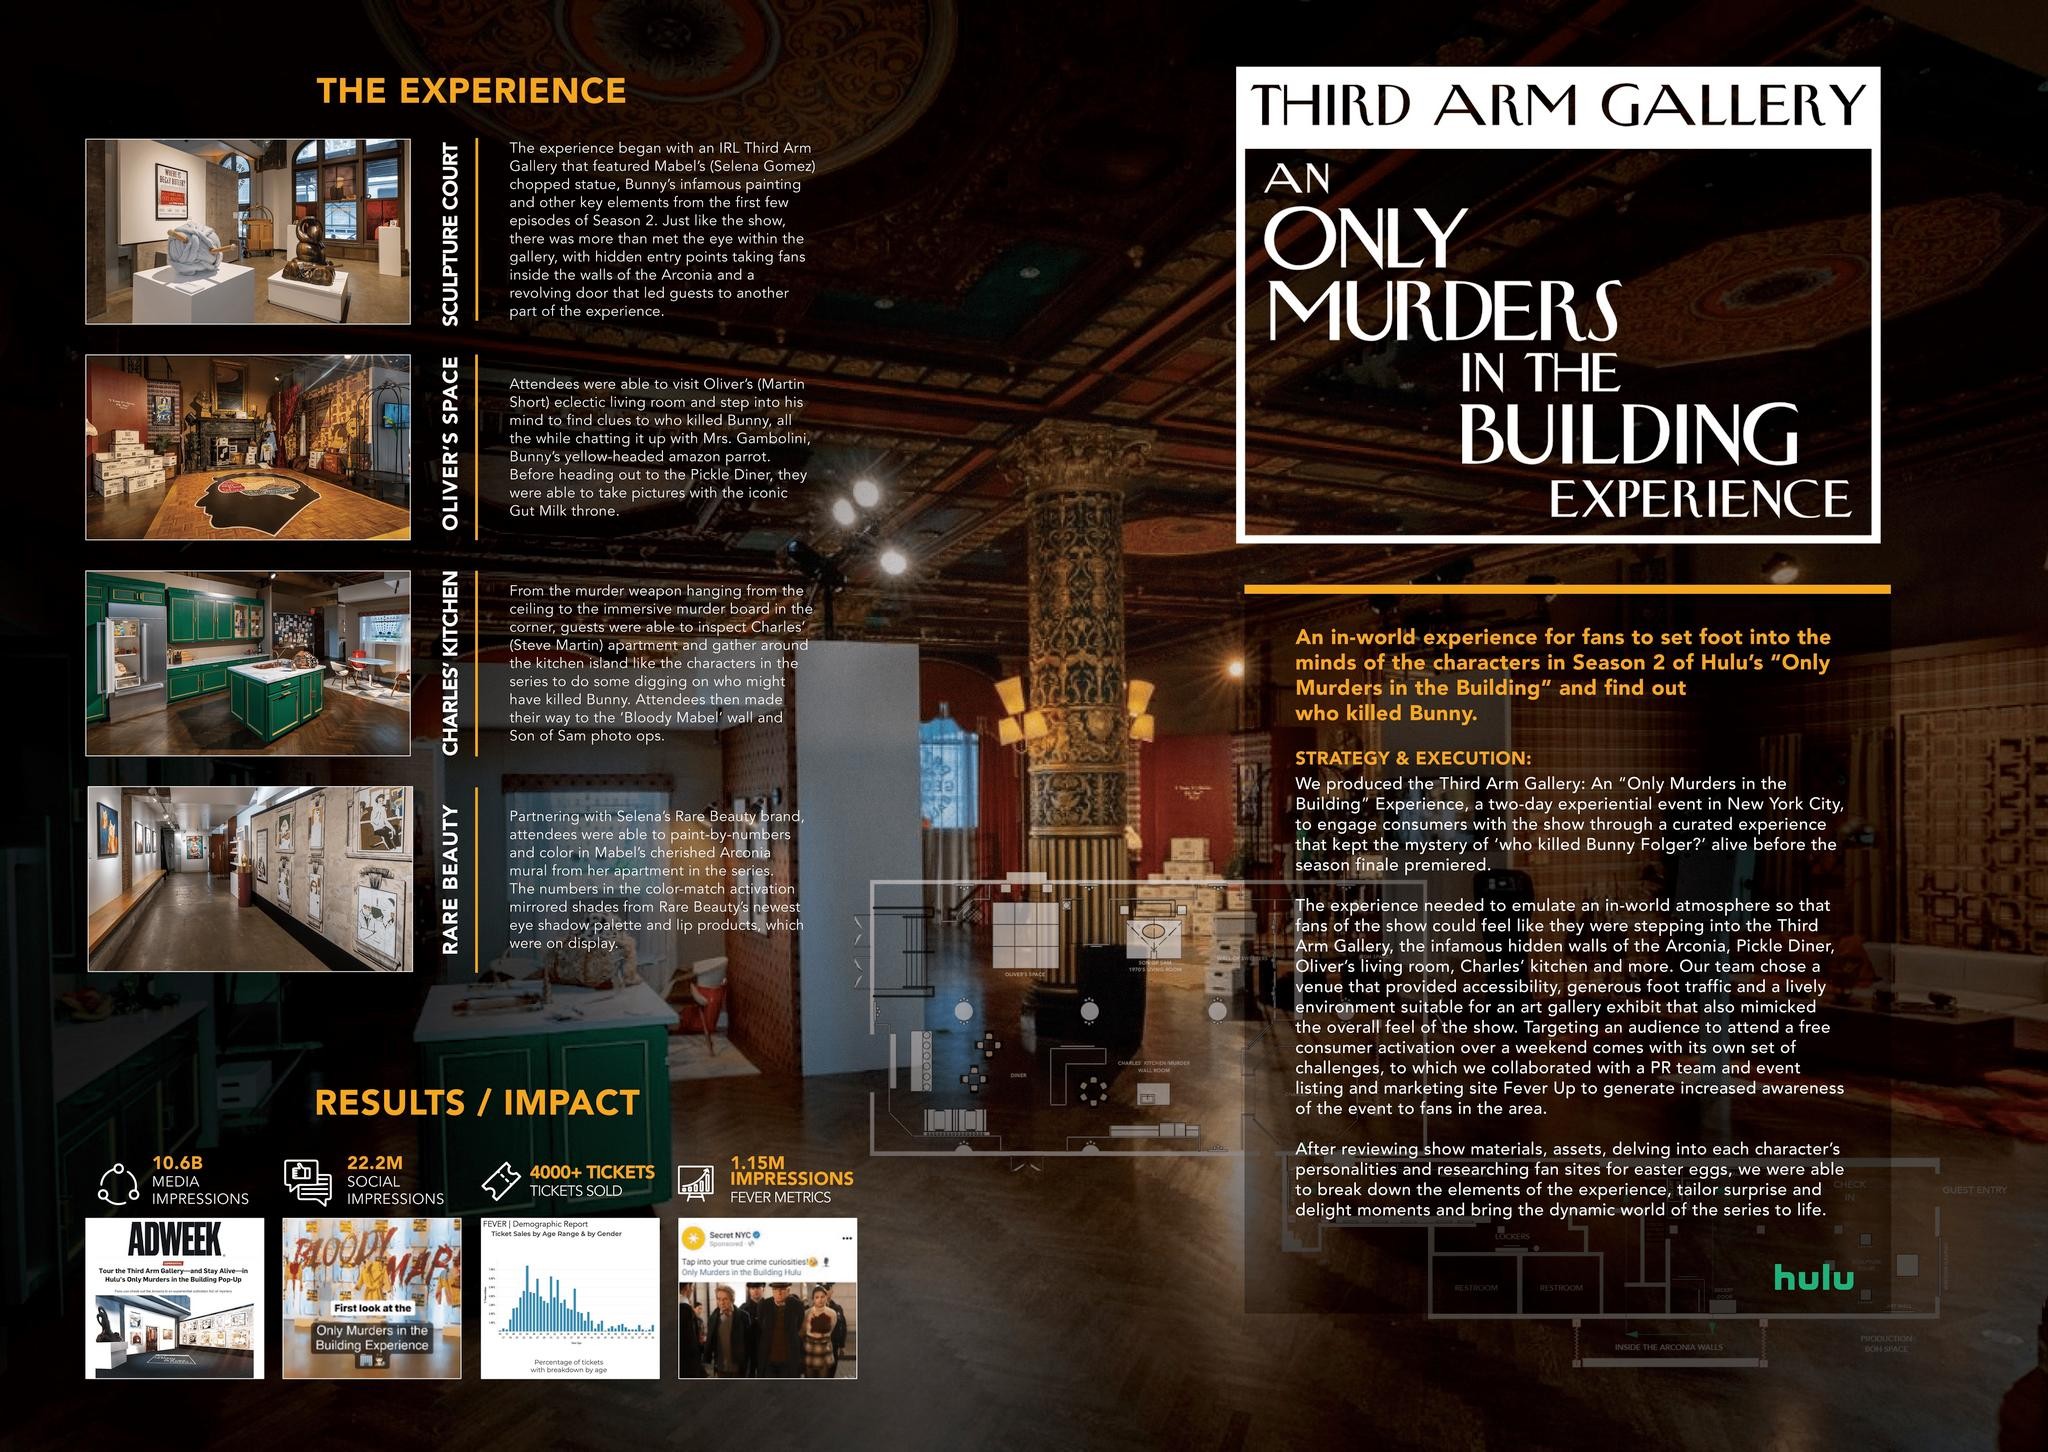 Third Arm Gallery: An “Only Murders in the Building” Experience